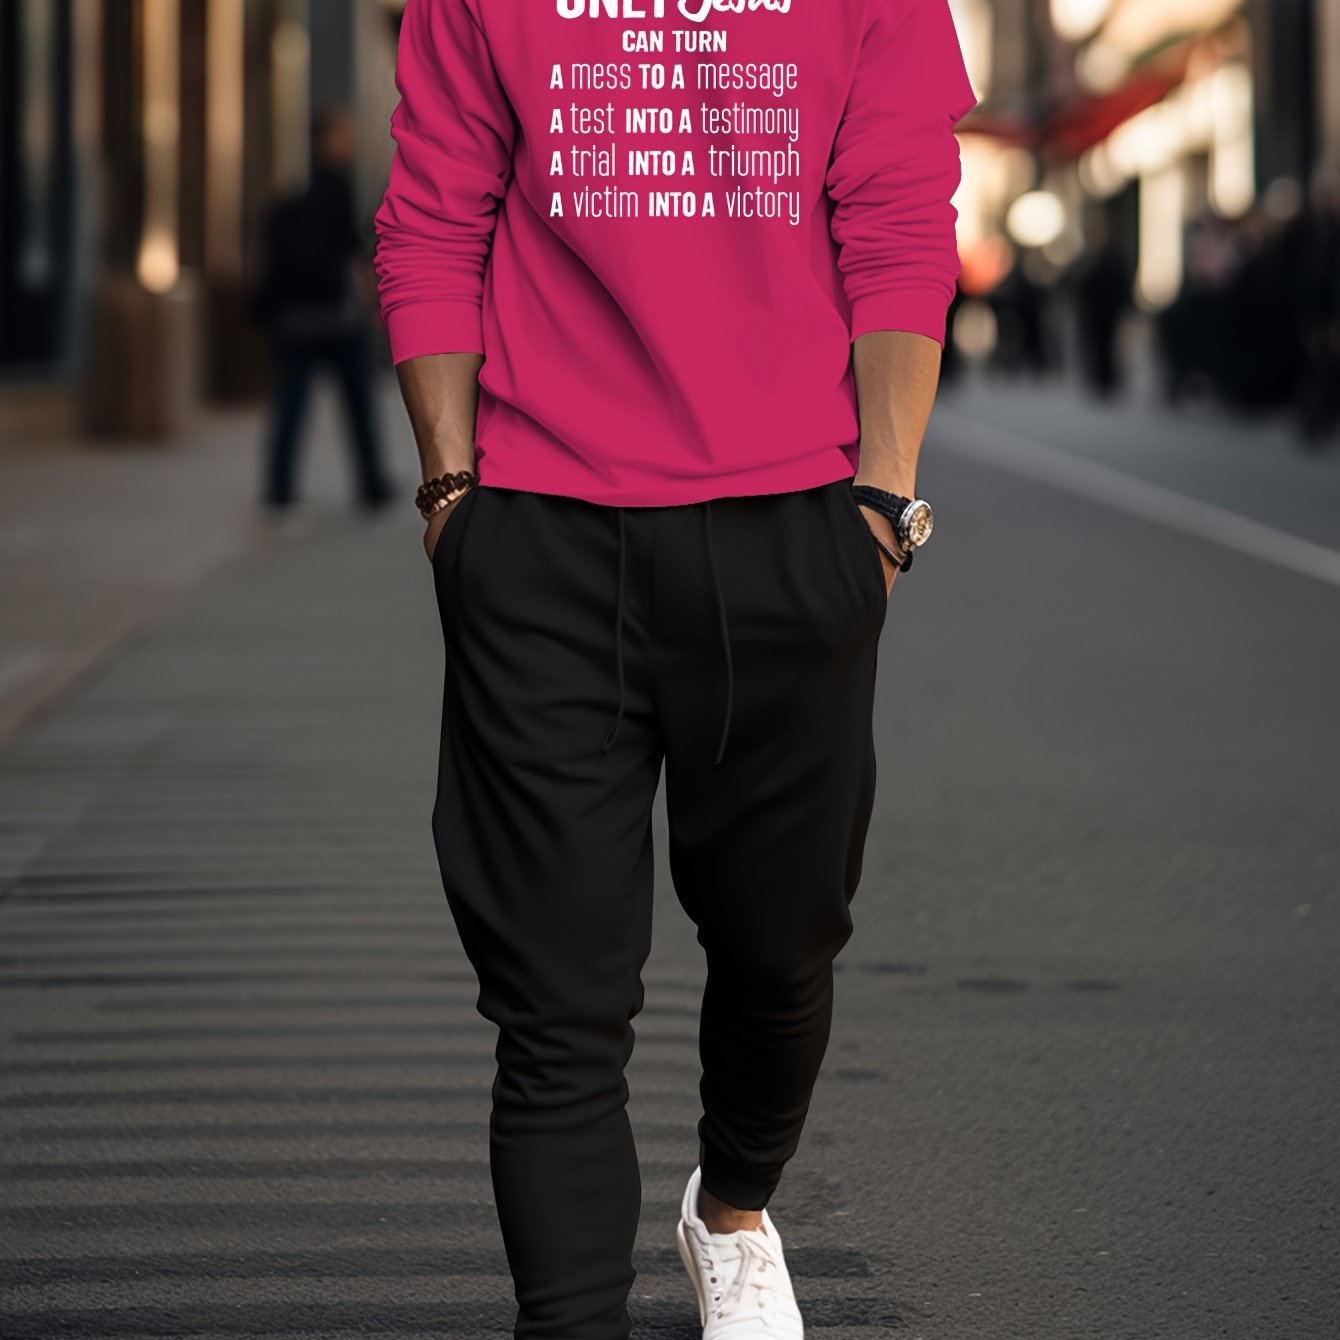 Only Jesus Can Men's Christian Casual Outfit claimedbygoddesigns